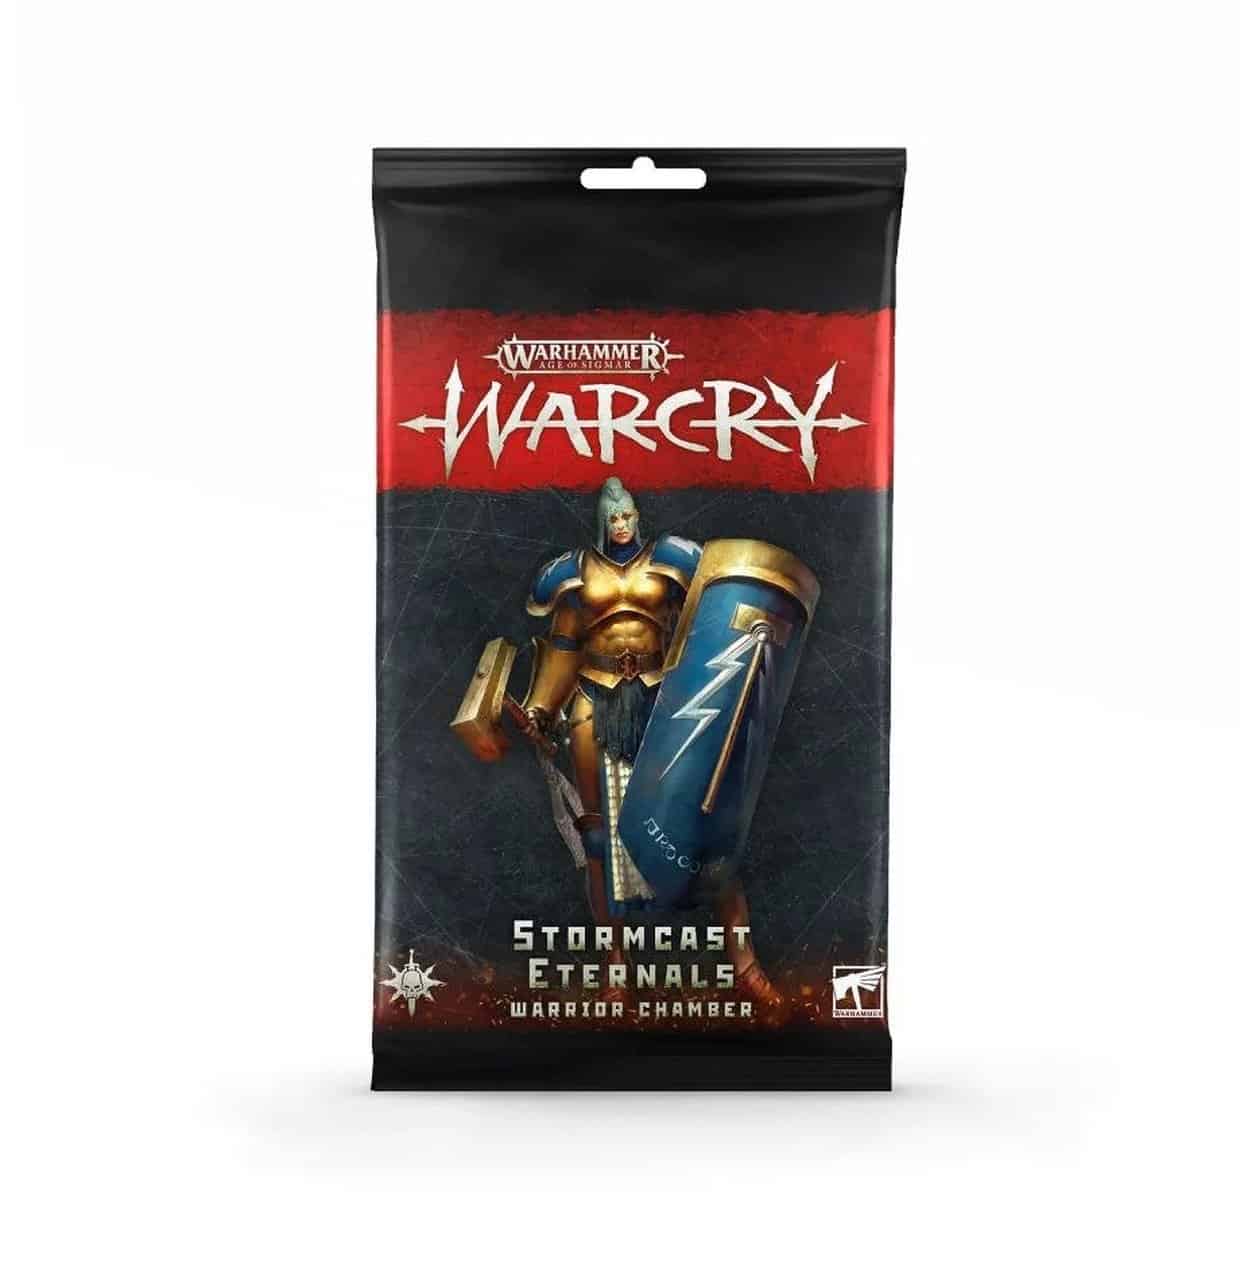 Warcry - Stormcast Eternals Warrior Chamber Card Pack